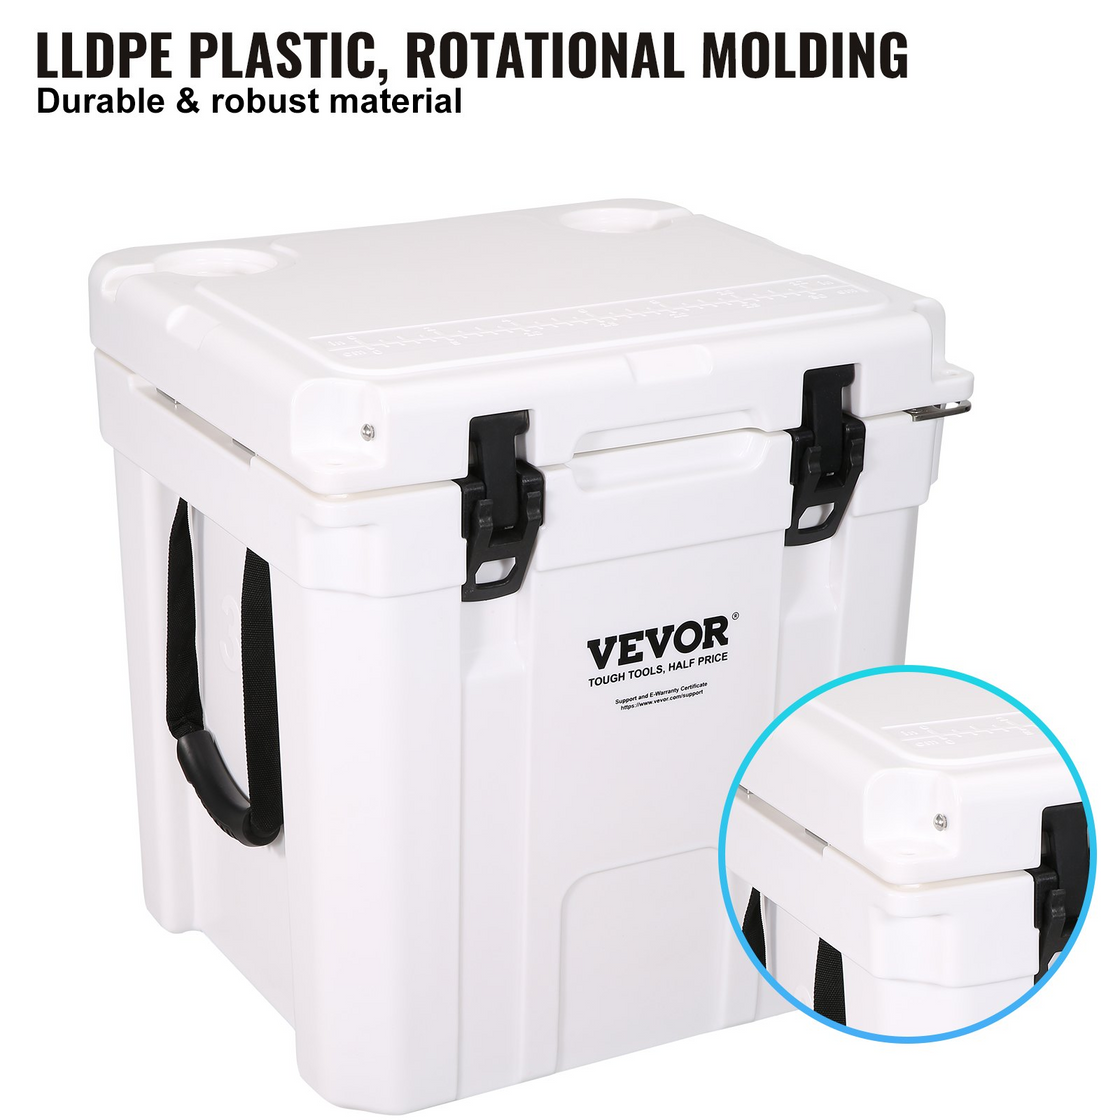 VEVOR Insulated Portable Cooler, 33 qt, Holds 35 Cans, Ice Retention Hard Cooler with Heavy Duty Handle, Ice Chest Lunch Box for Camping, Beach, Picnic, Travel, Outdoor, Keeps Ice for up to 6 Days